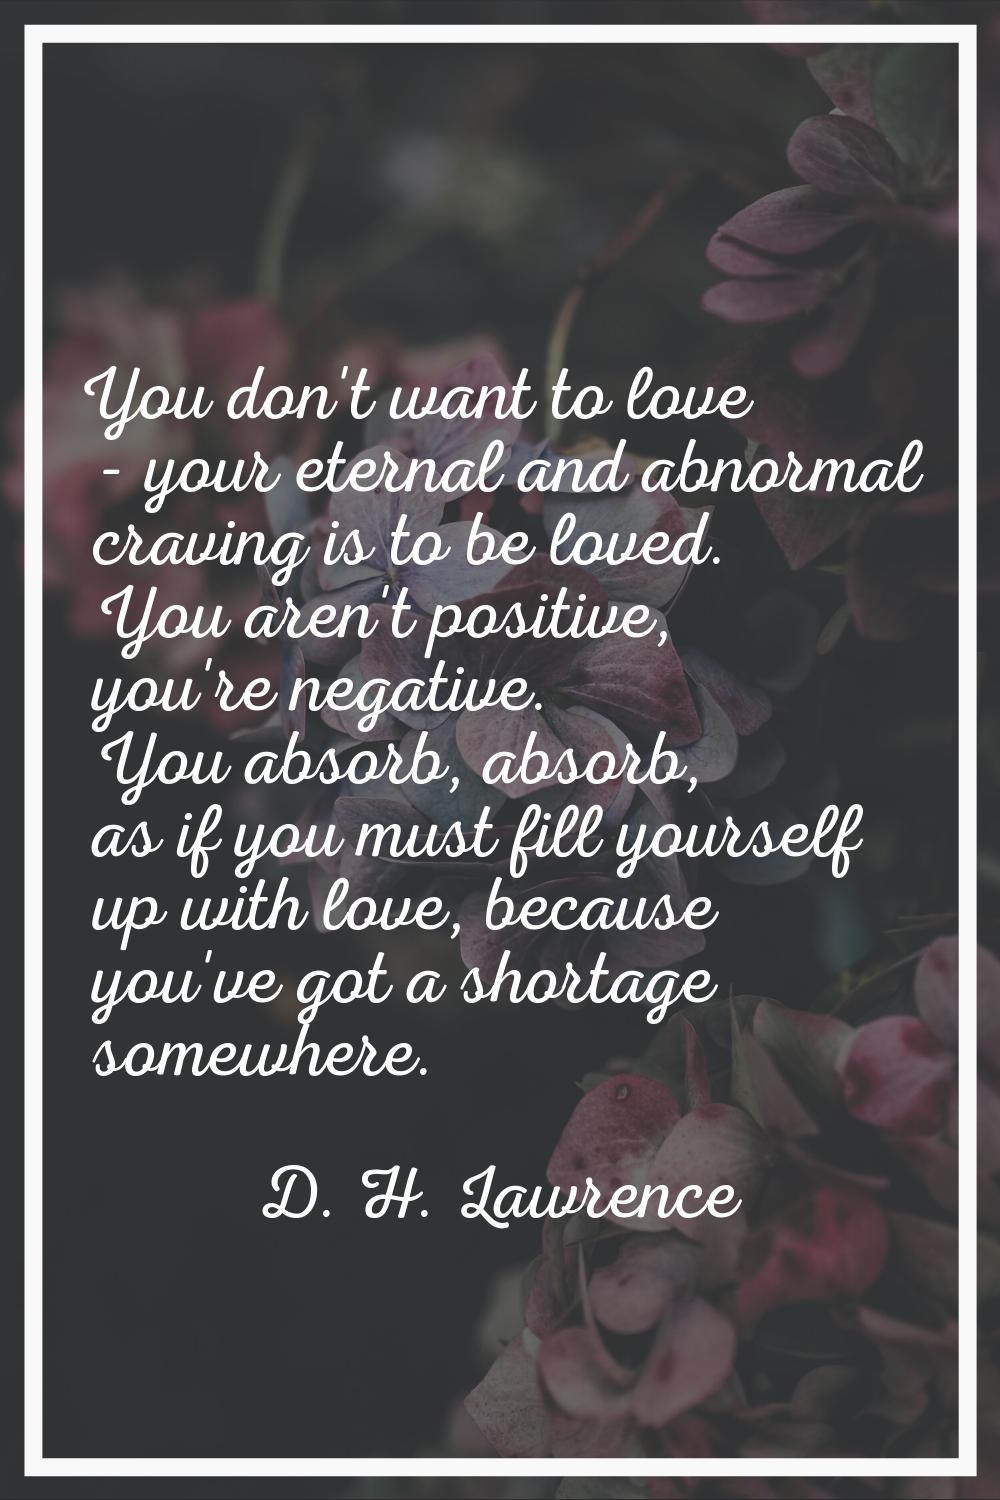 You don't want to love - your eternal and abnormal craving is to be loved. You aren't positive, you